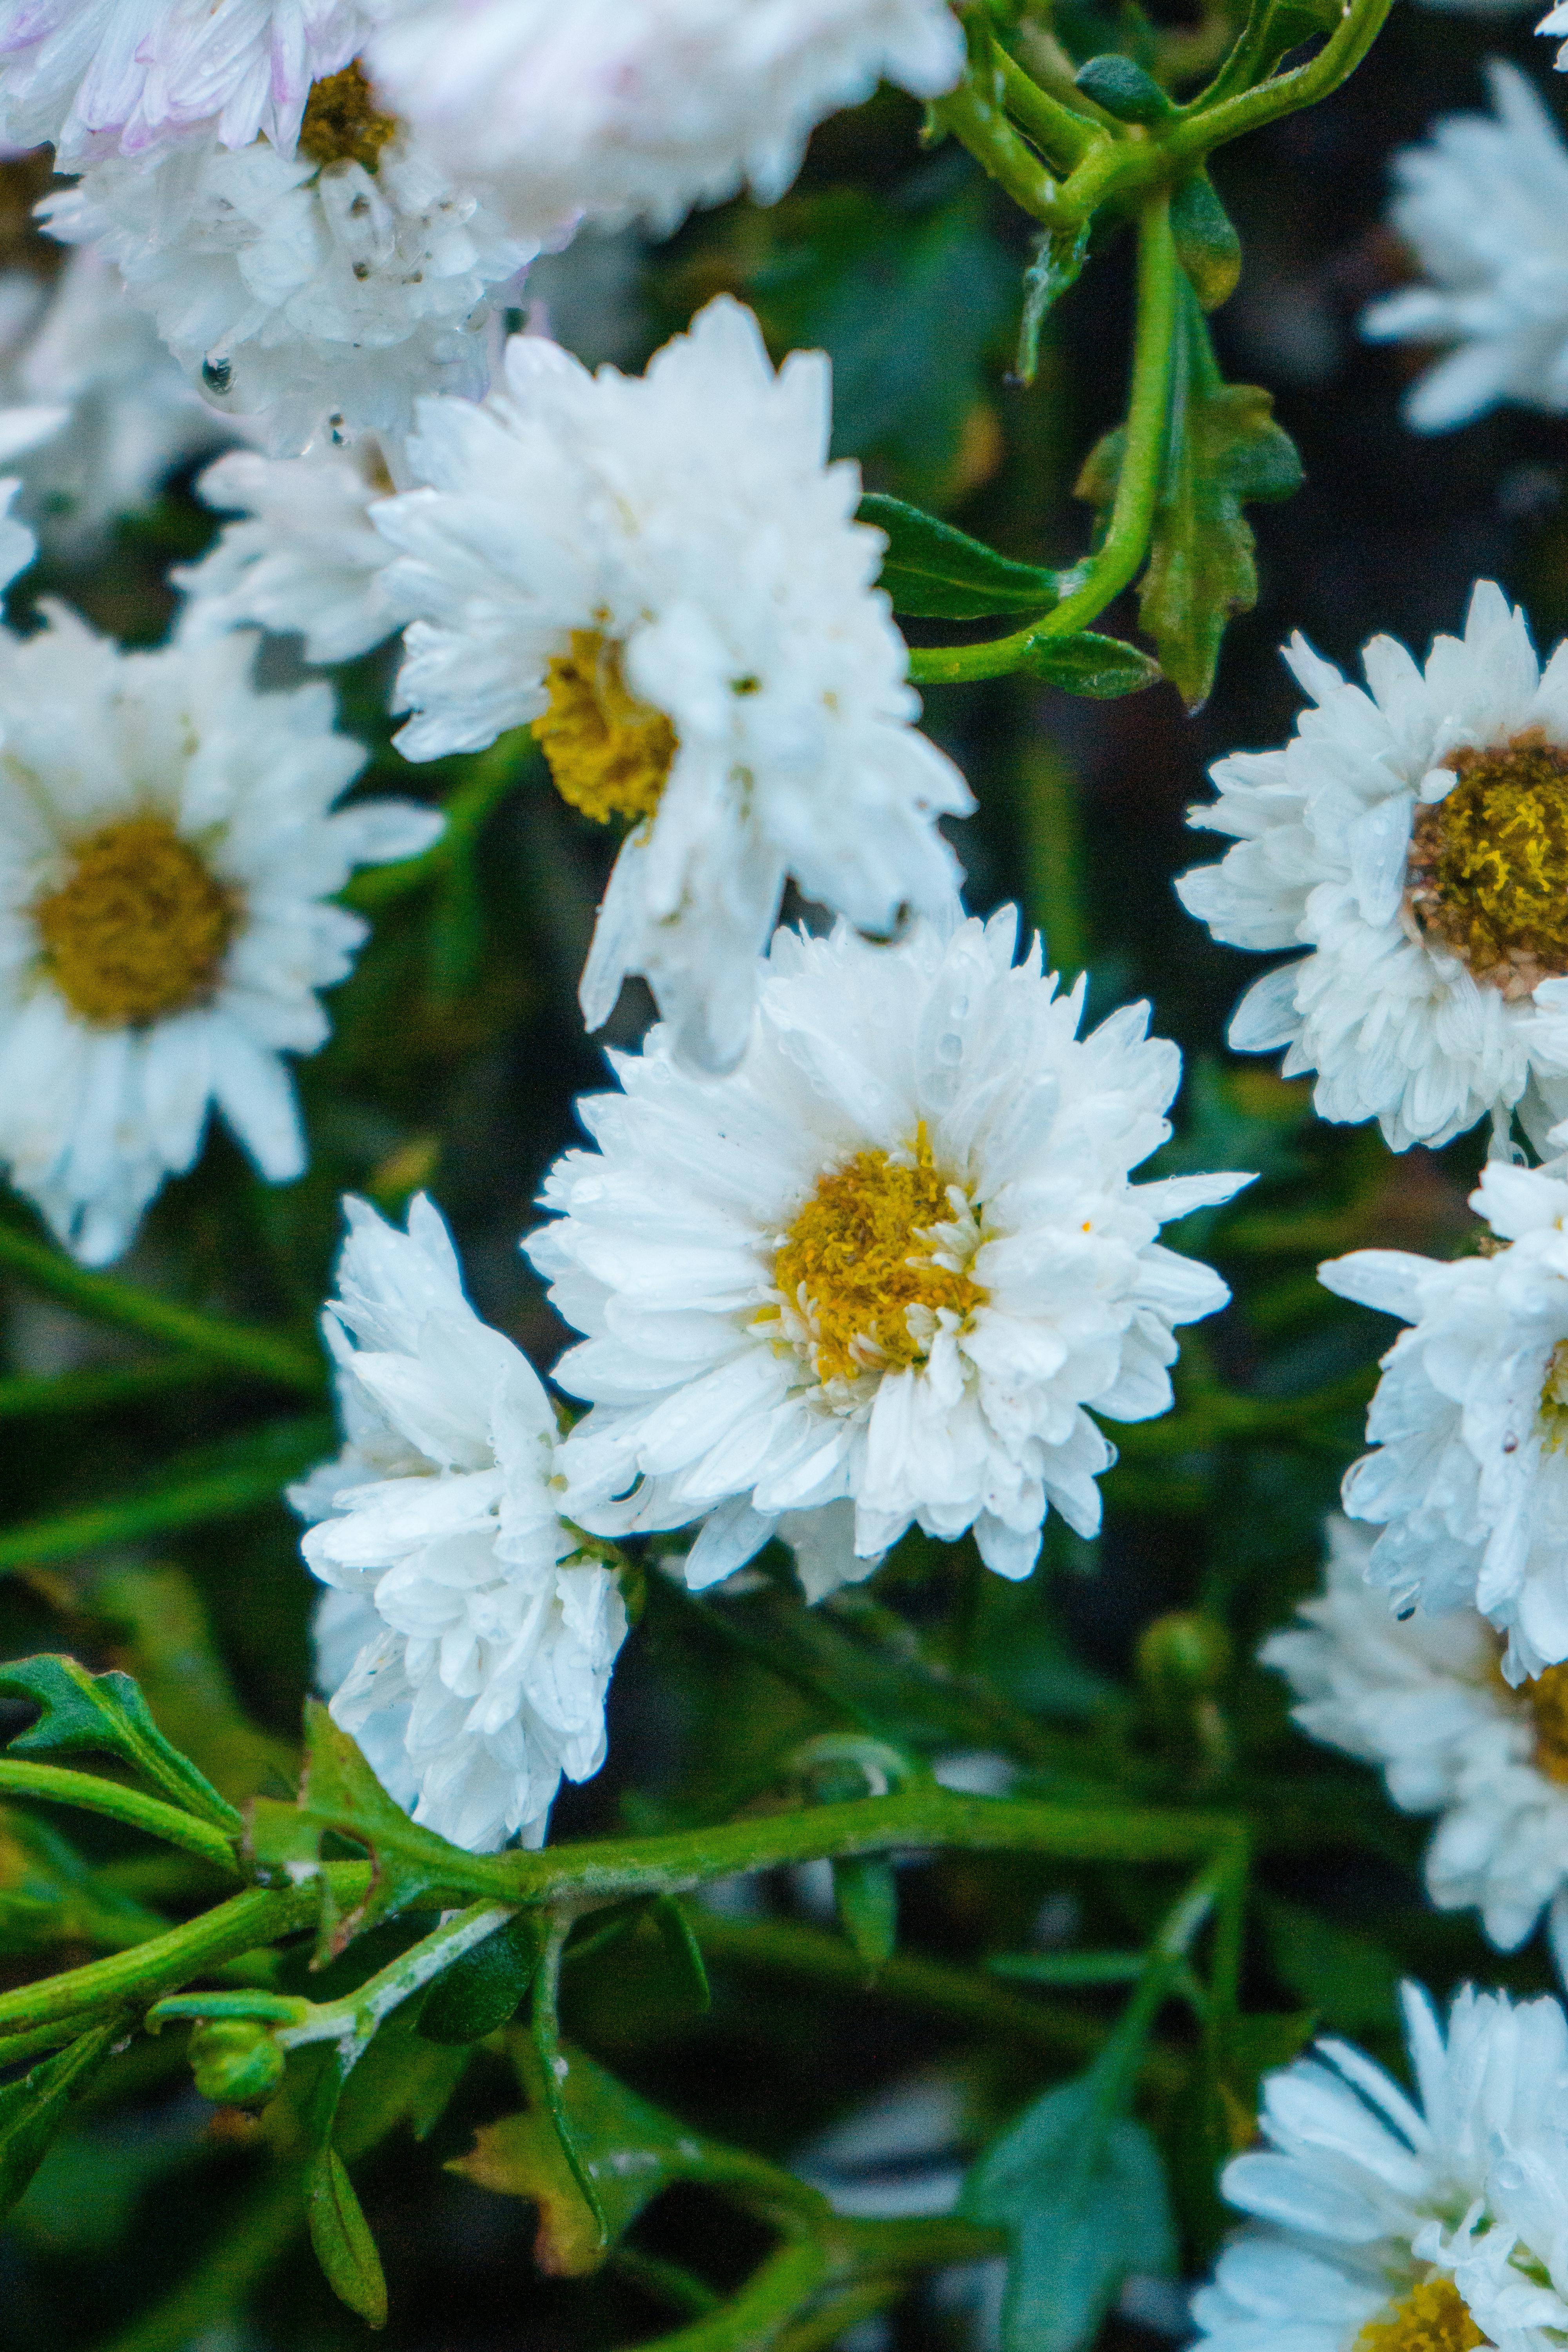 A group of white flowers with green stems photo – Free Flowers Image on  Unsplash